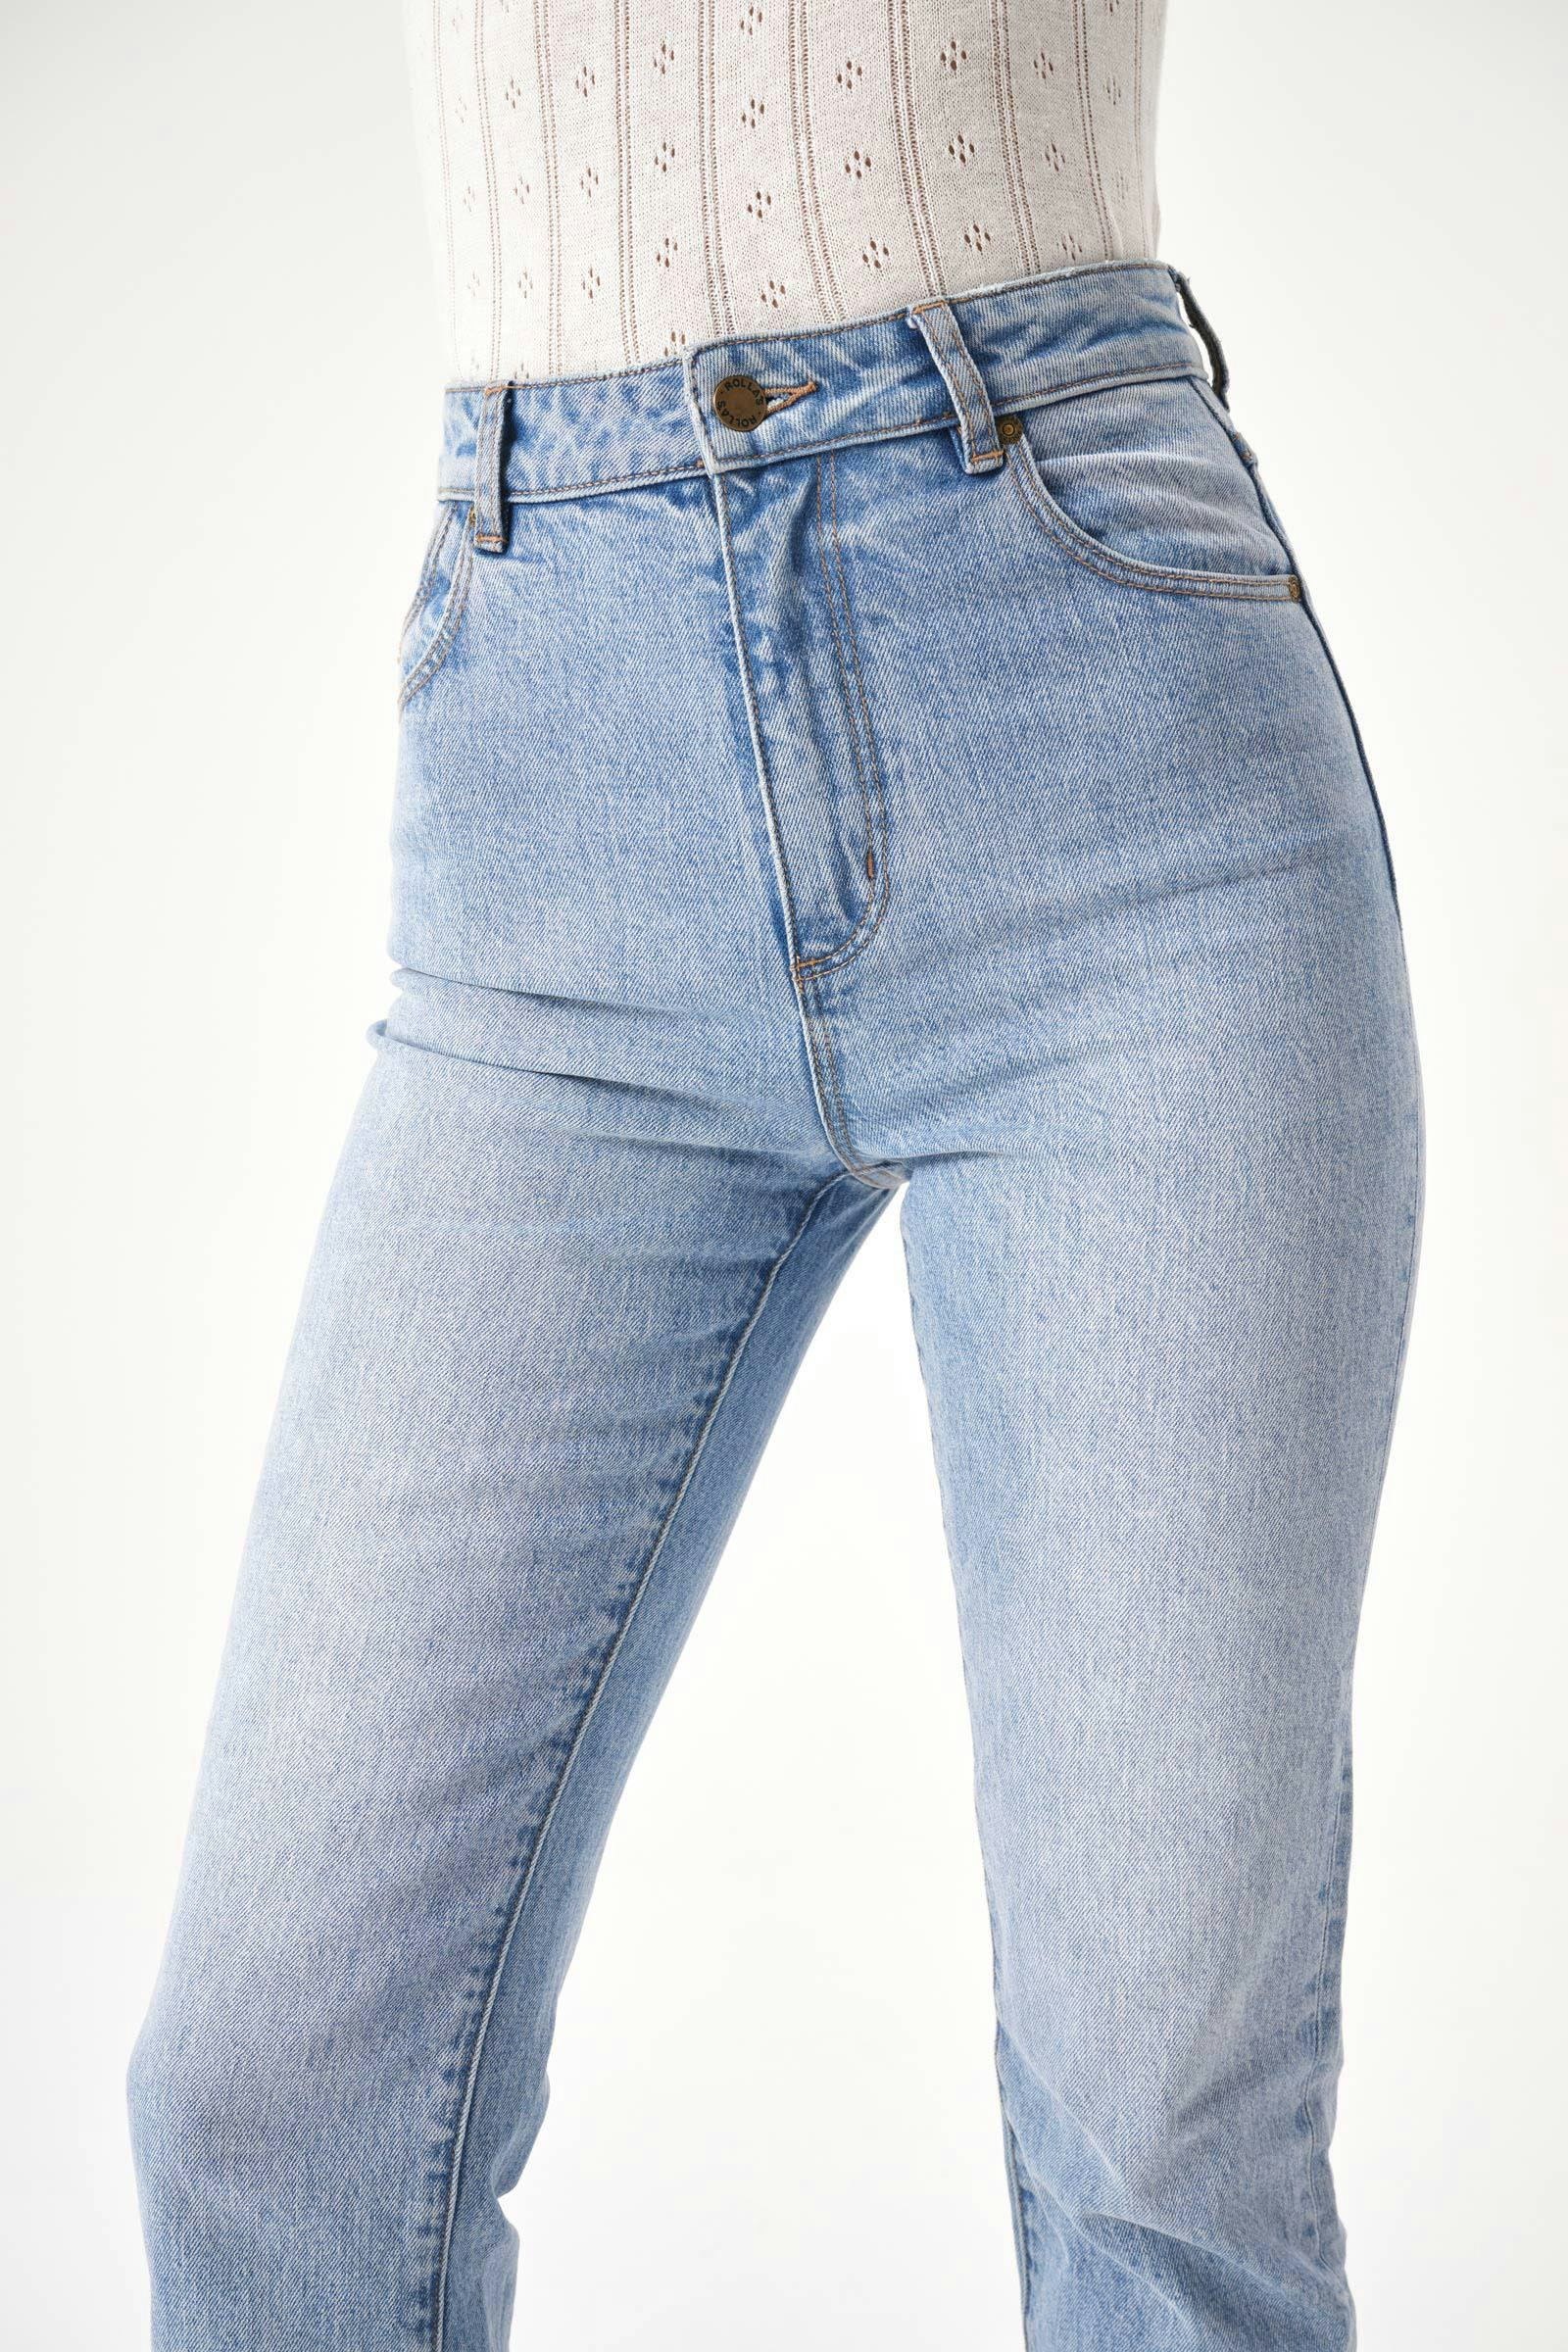 Buy Dusters - Comfort Old Stone Online | Rollas Jeans